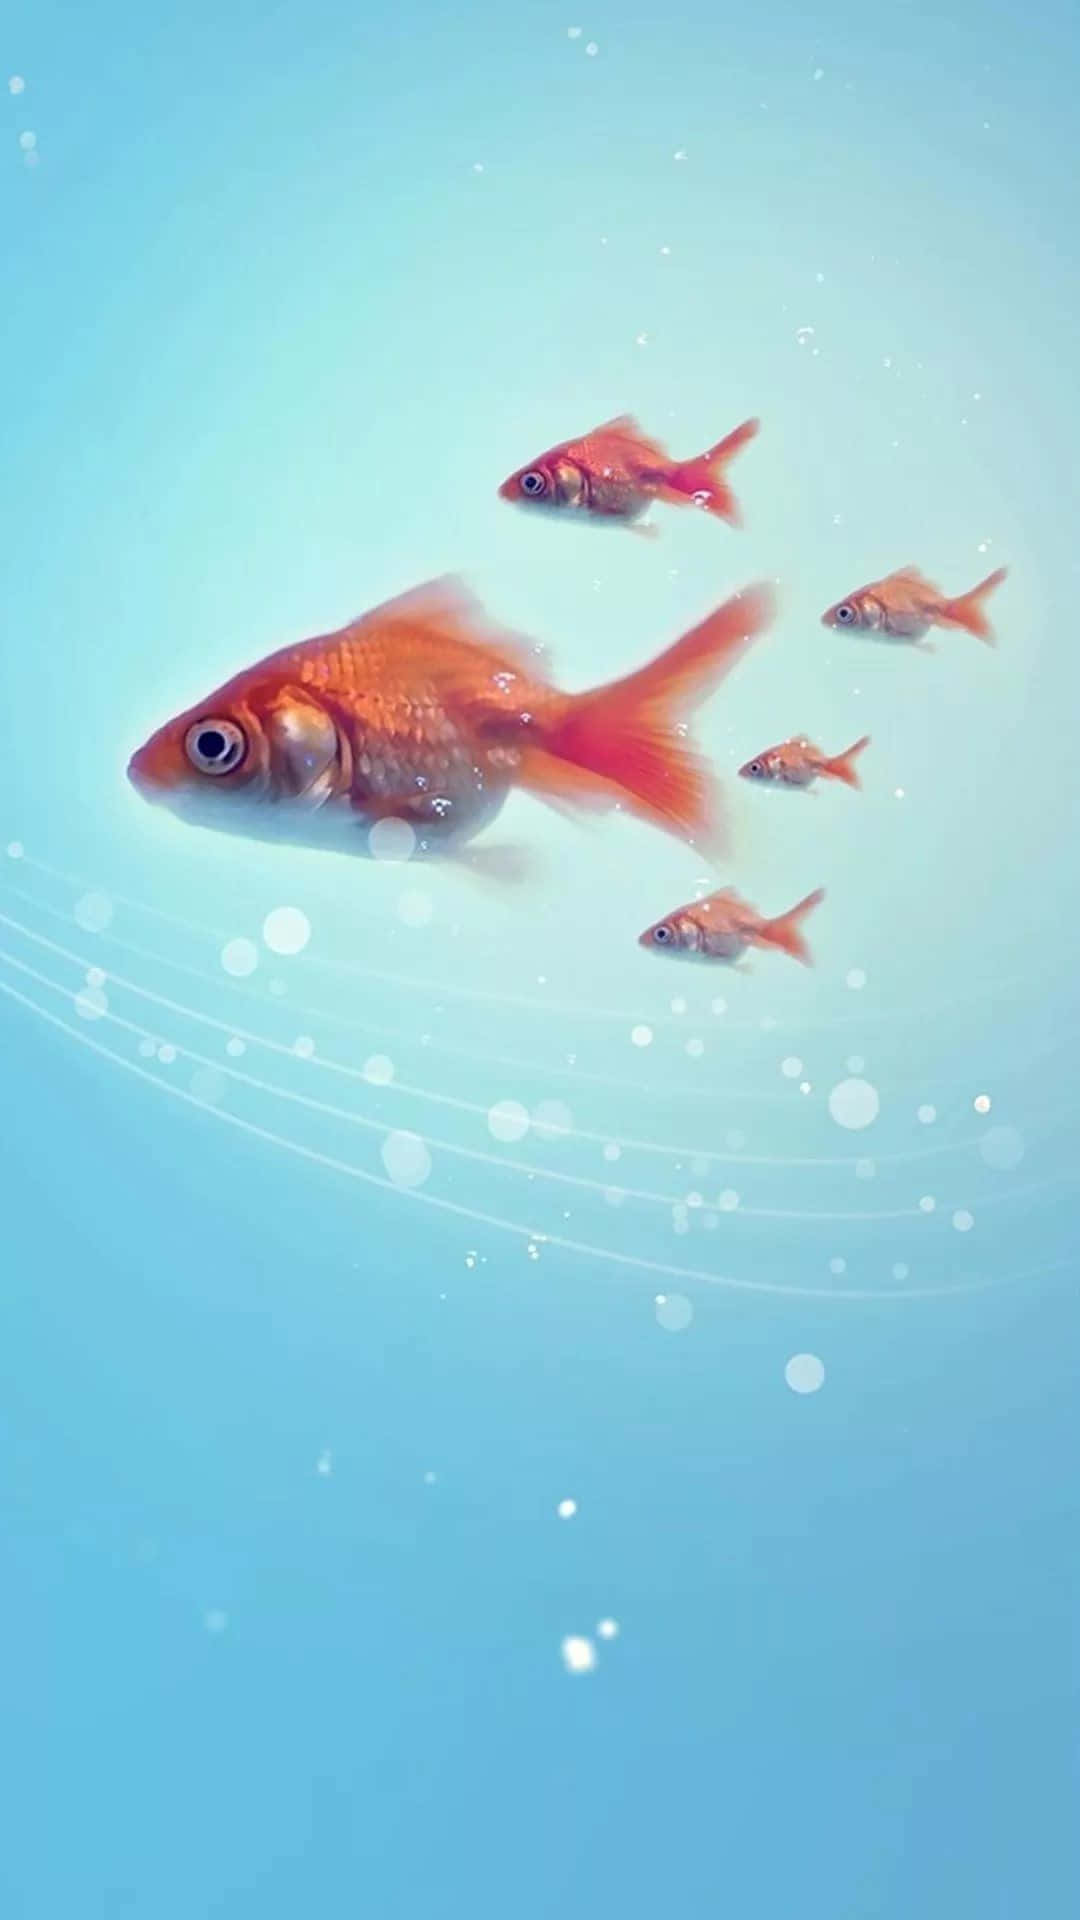 Look at the beauty of colorful fish swimming in the peaceful aquarium Wallpaper